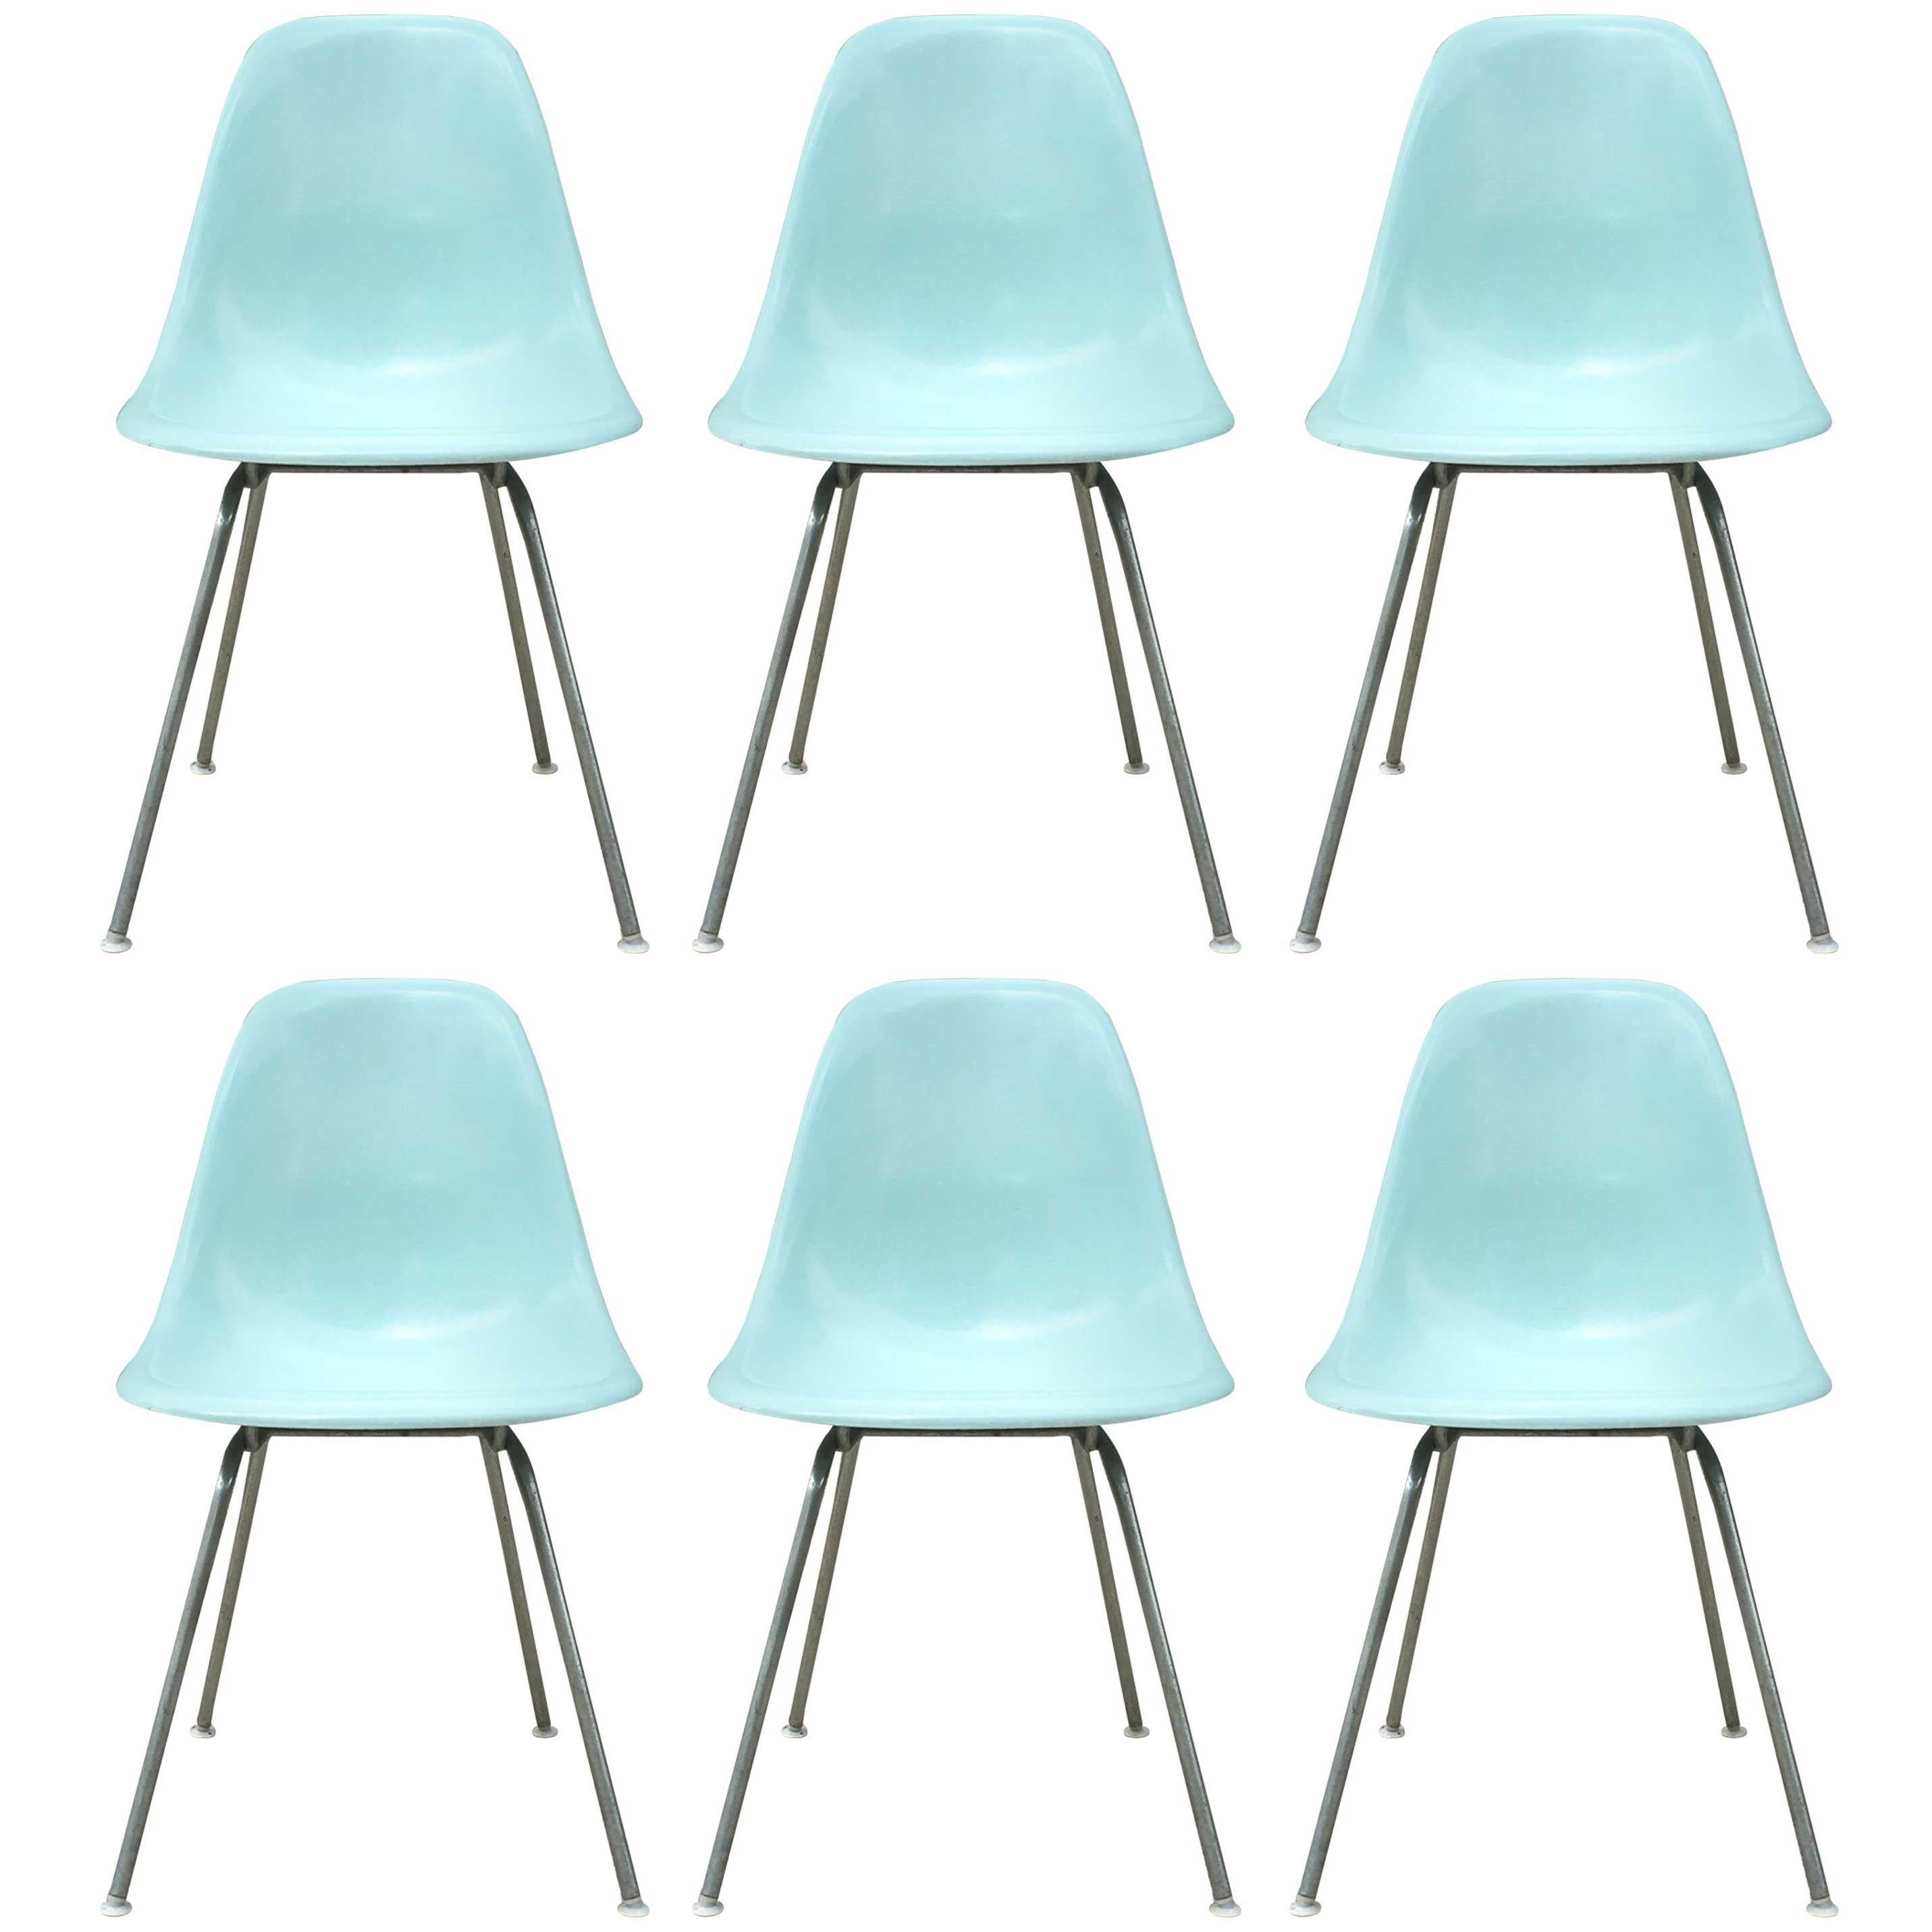 Six Herman Miller Eames Robin's Egg Blue Dining Chairs